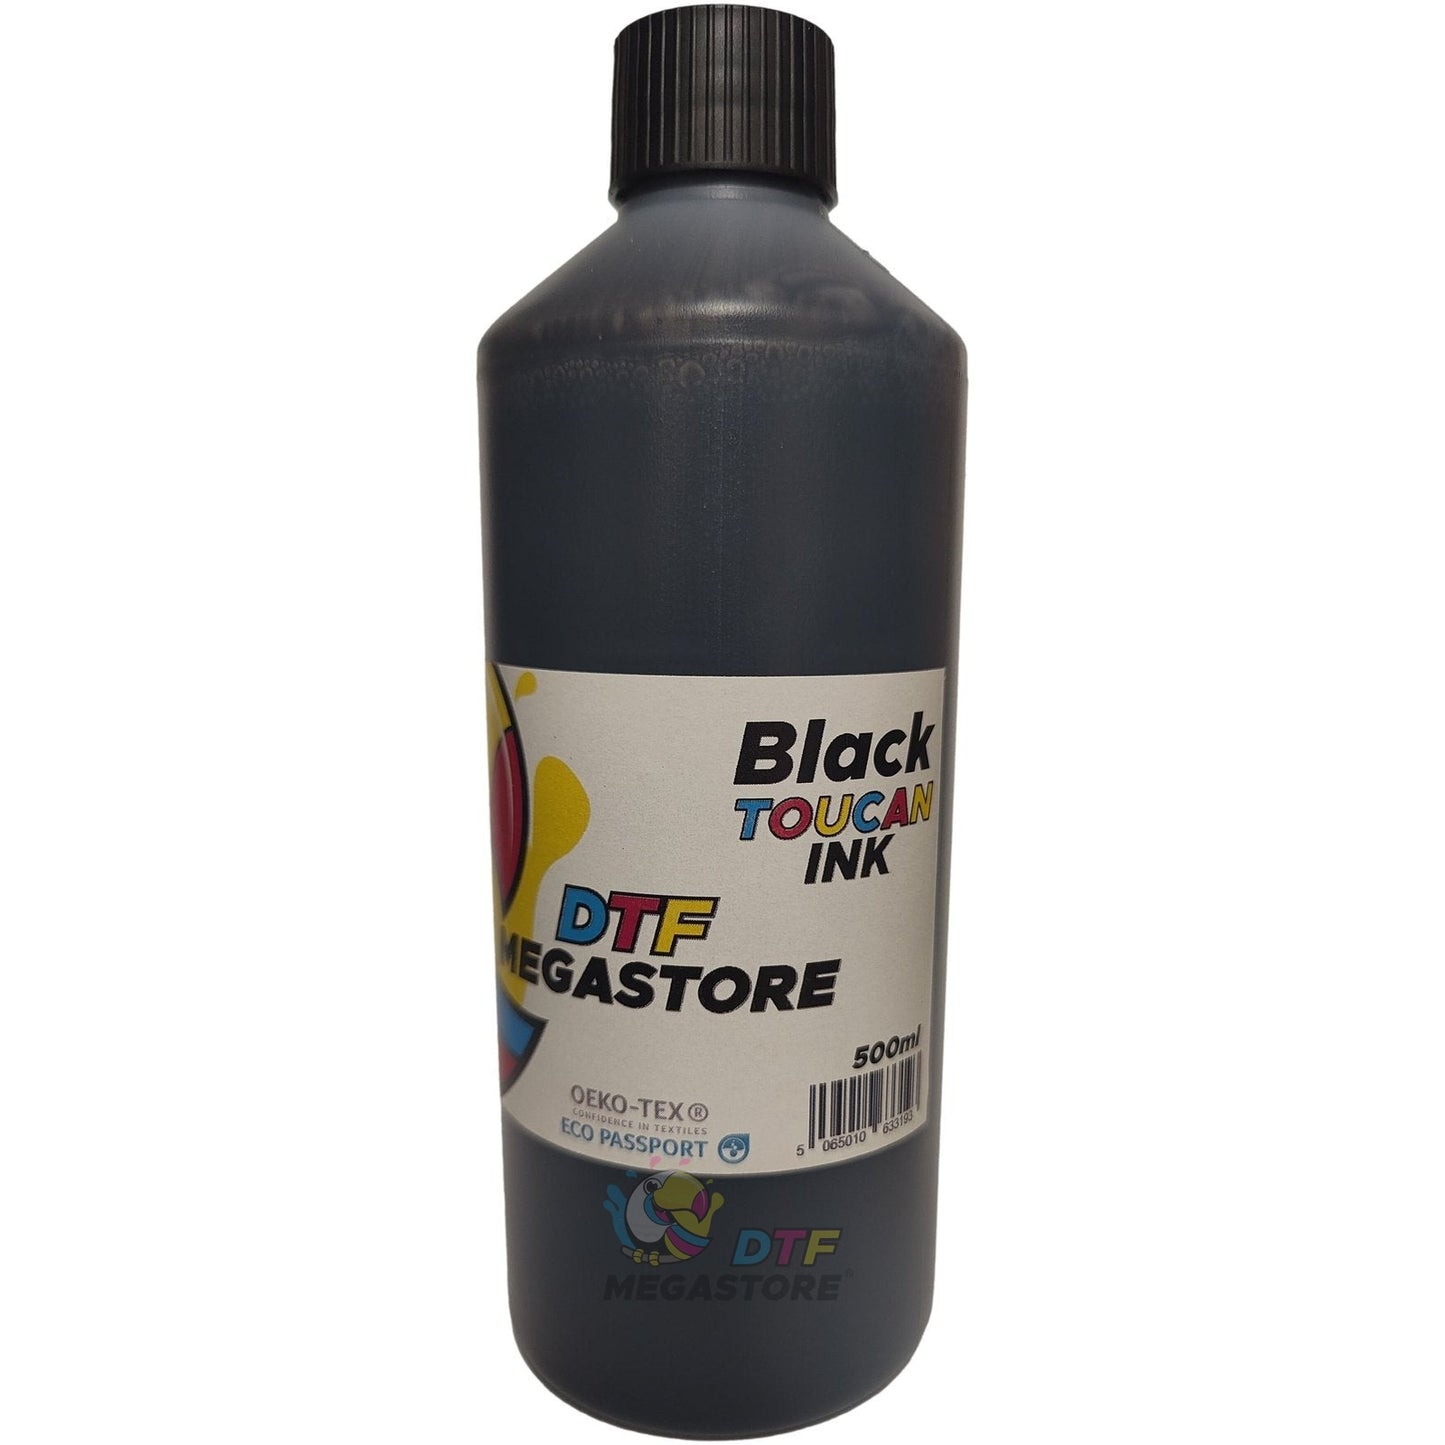 High Quality Black Premium DTF Direct to transfer film printing glycol glycerin pigment based ink 500ml UK fast Delivery